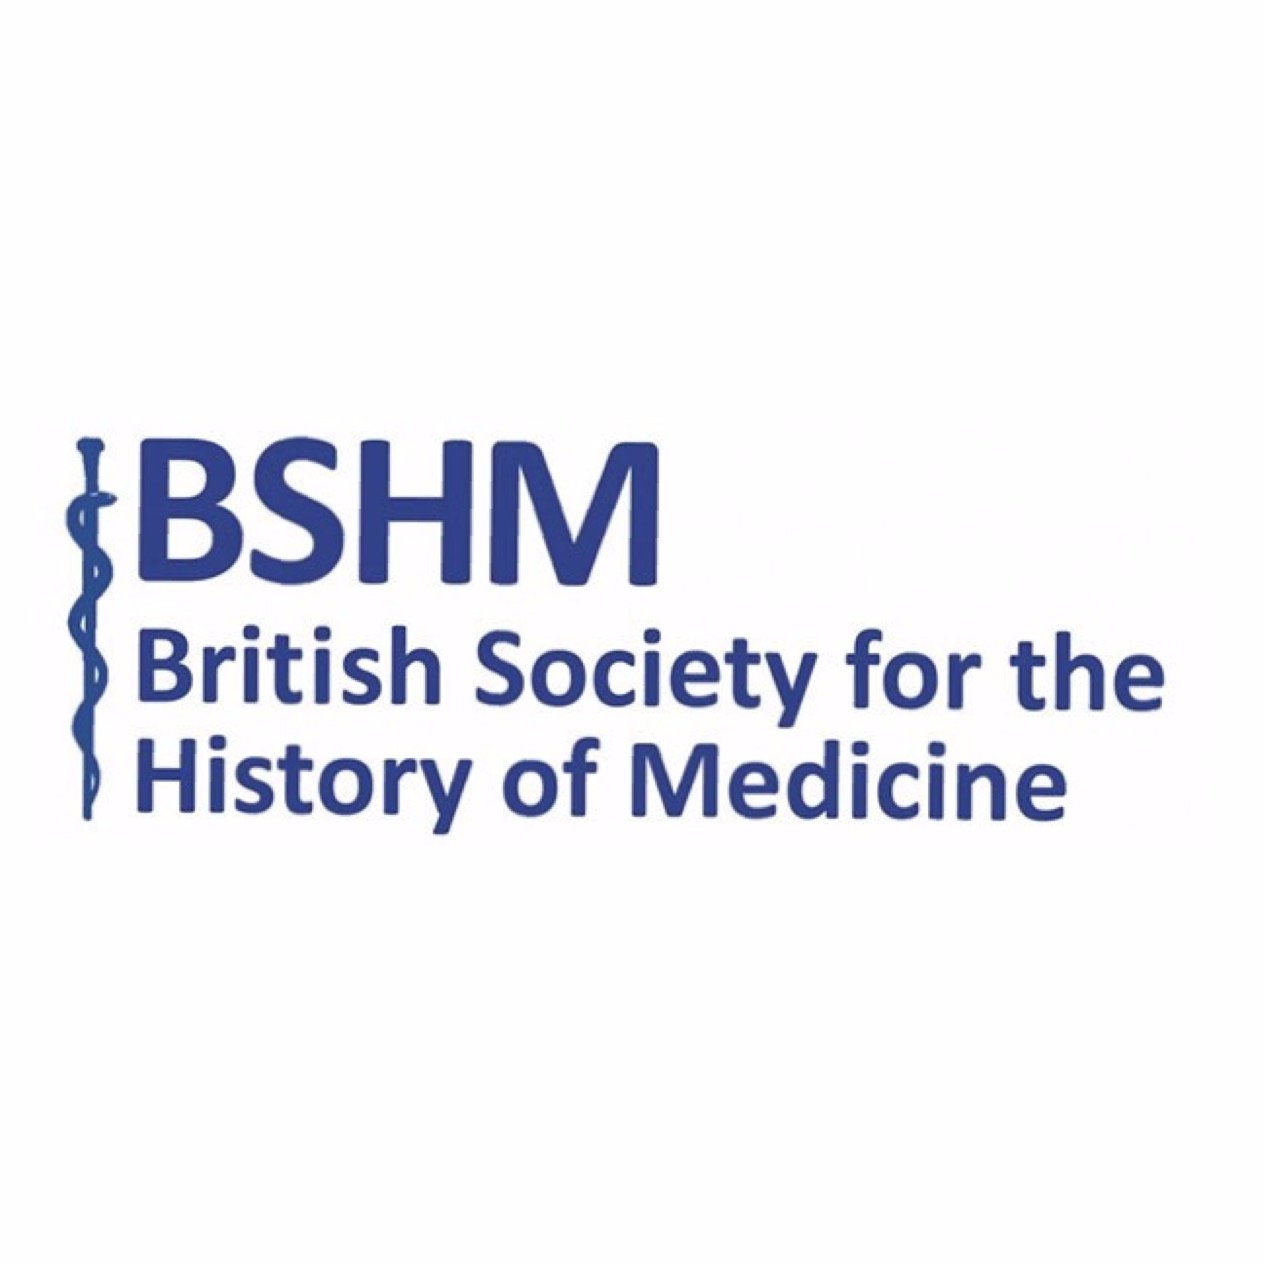 The BSHM is an umbrella organisation which brings together medical history societies and medical museums from all over the UK. https://t.co/OMInOZuVmJ